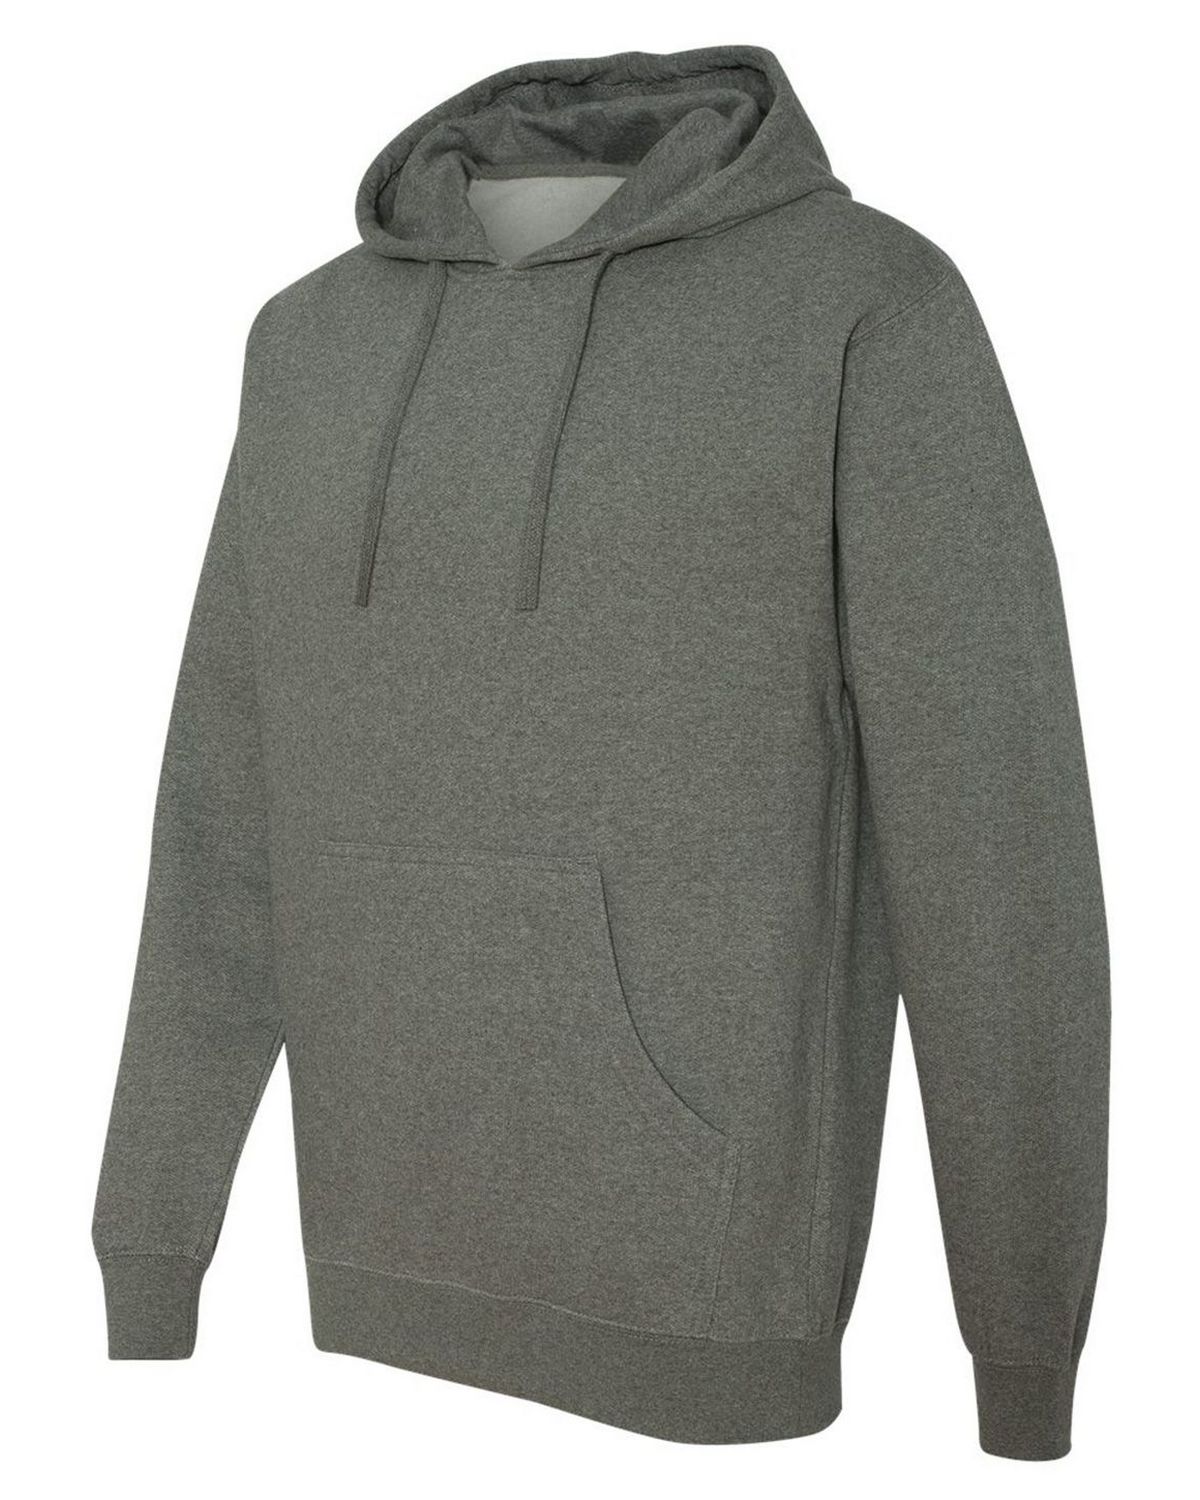 Reviews about Independent Trading Co. SS4500 Mens Midweight Hooded ...